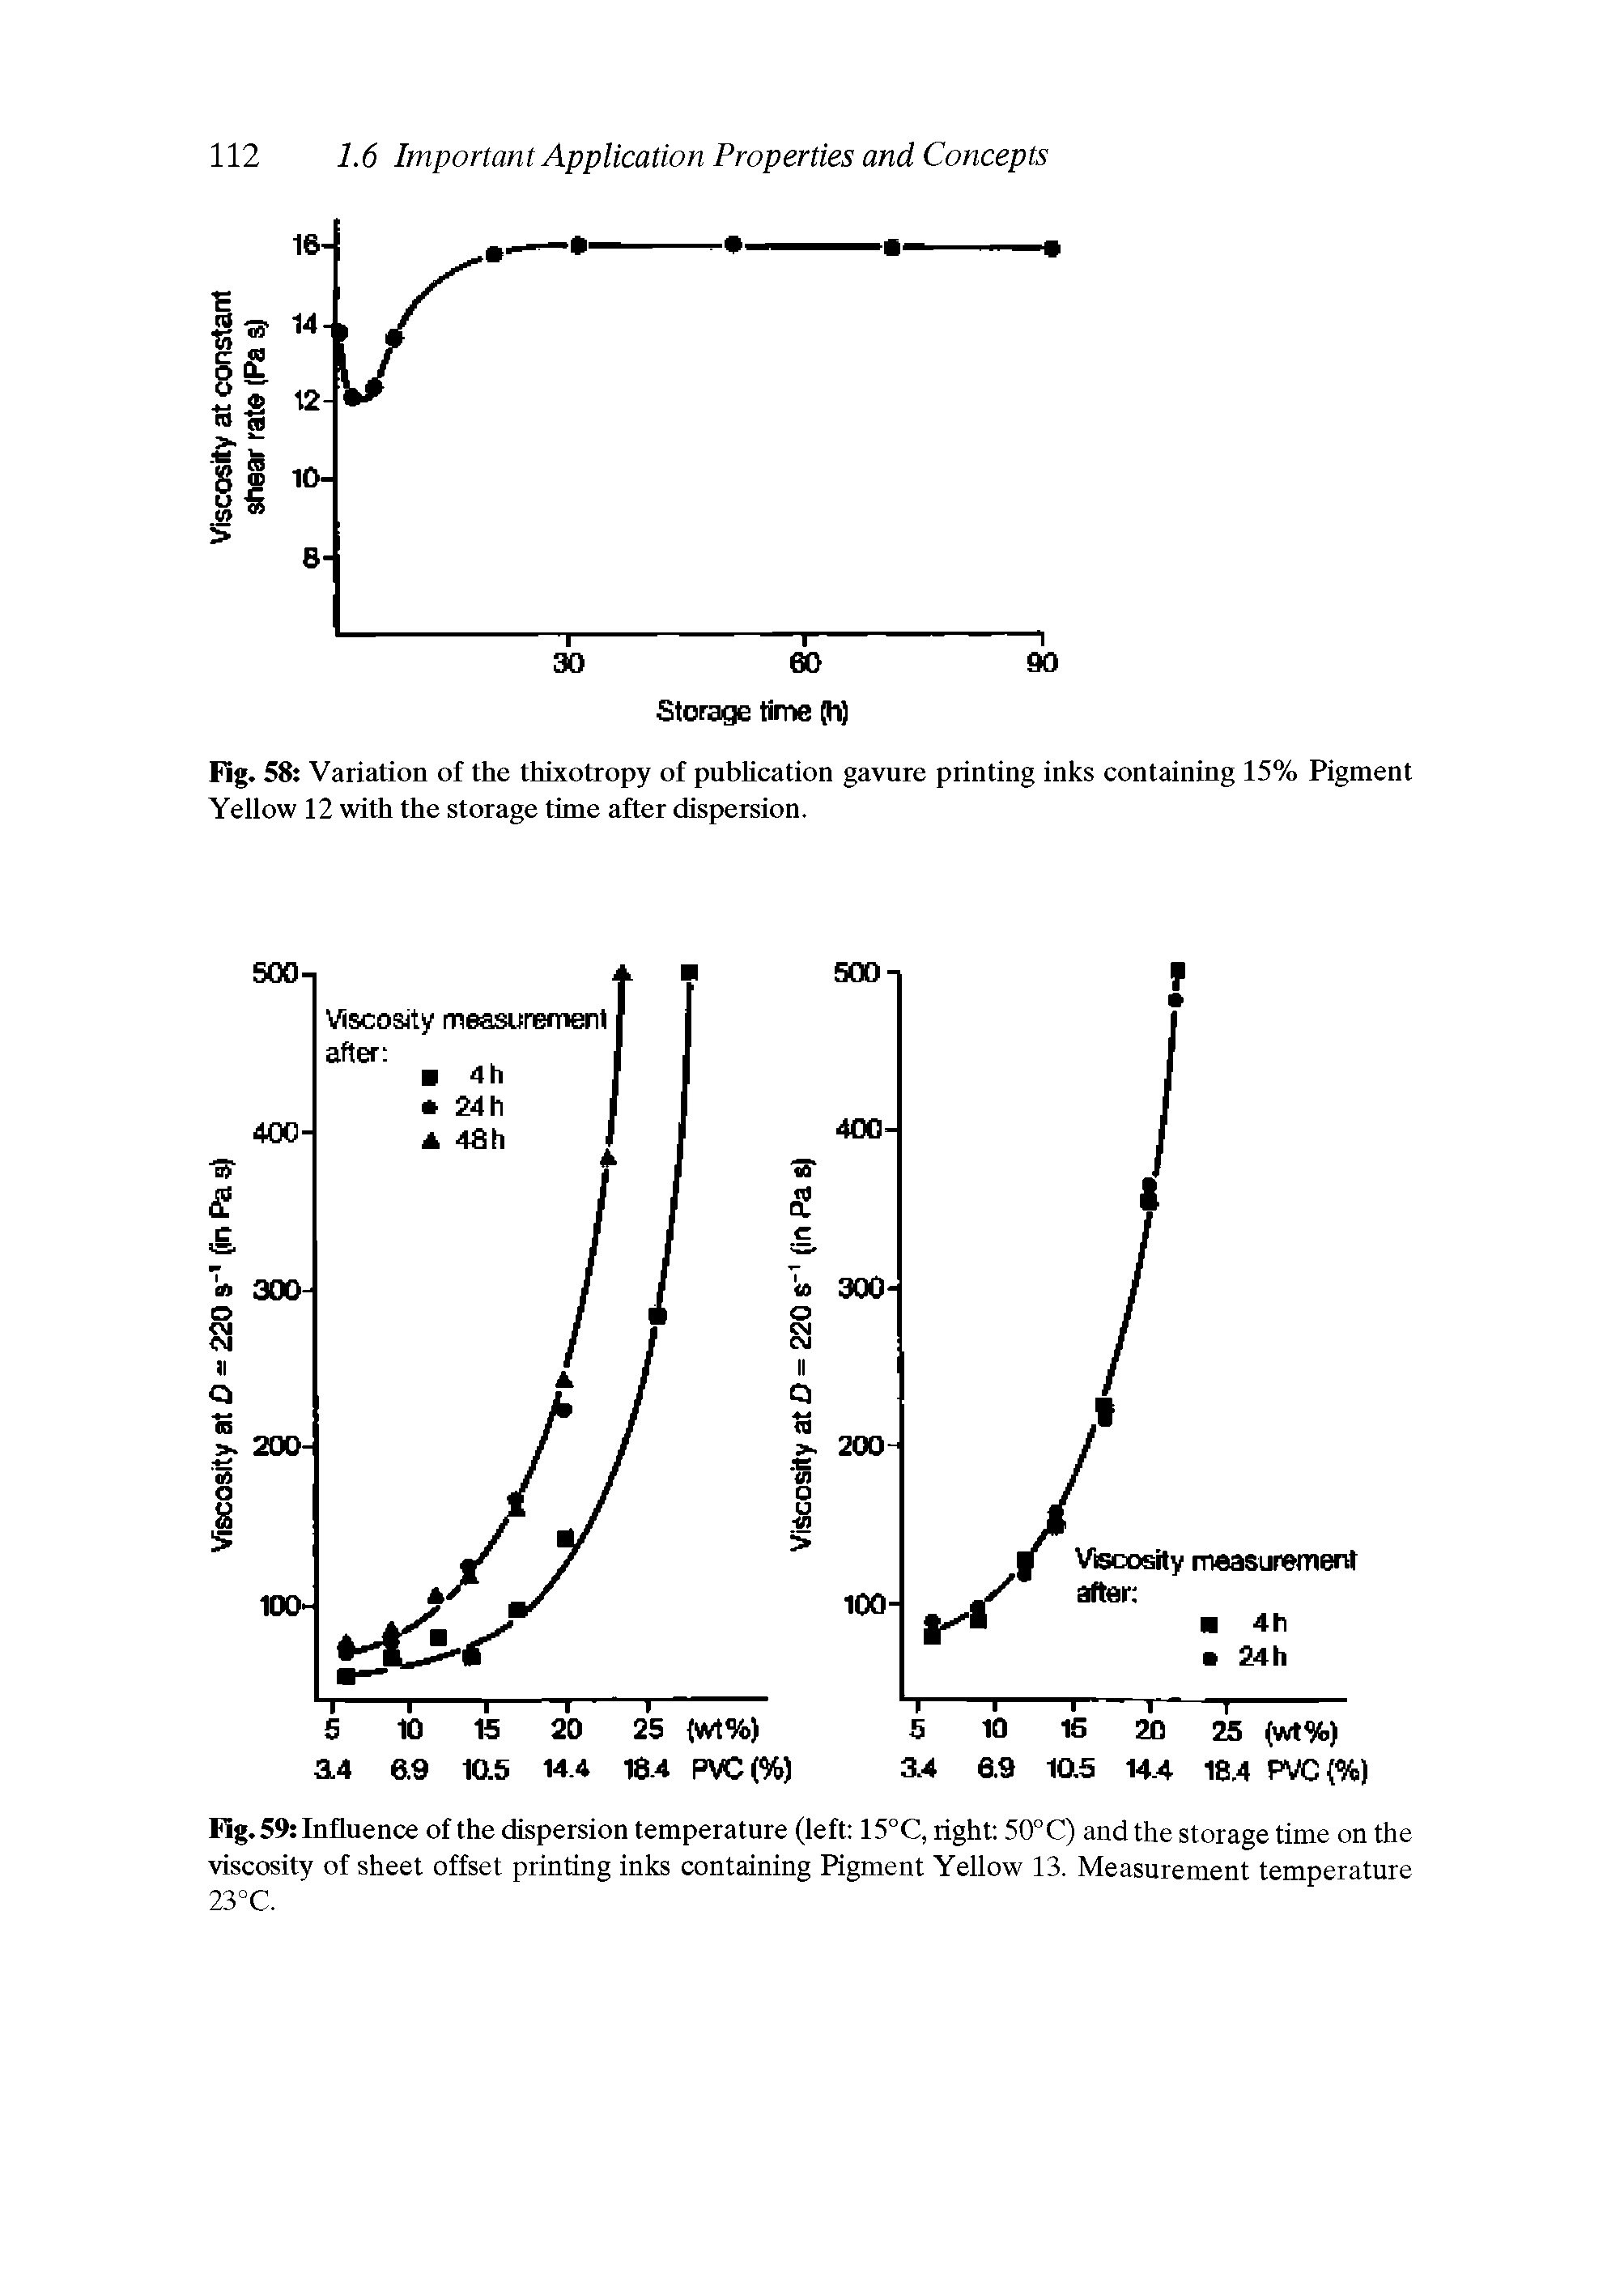 Fig. 58 Variation of the thixotropy of publication gavure printing inks containing 15% Pigment Yellow 12 with the storage time after dispersion.